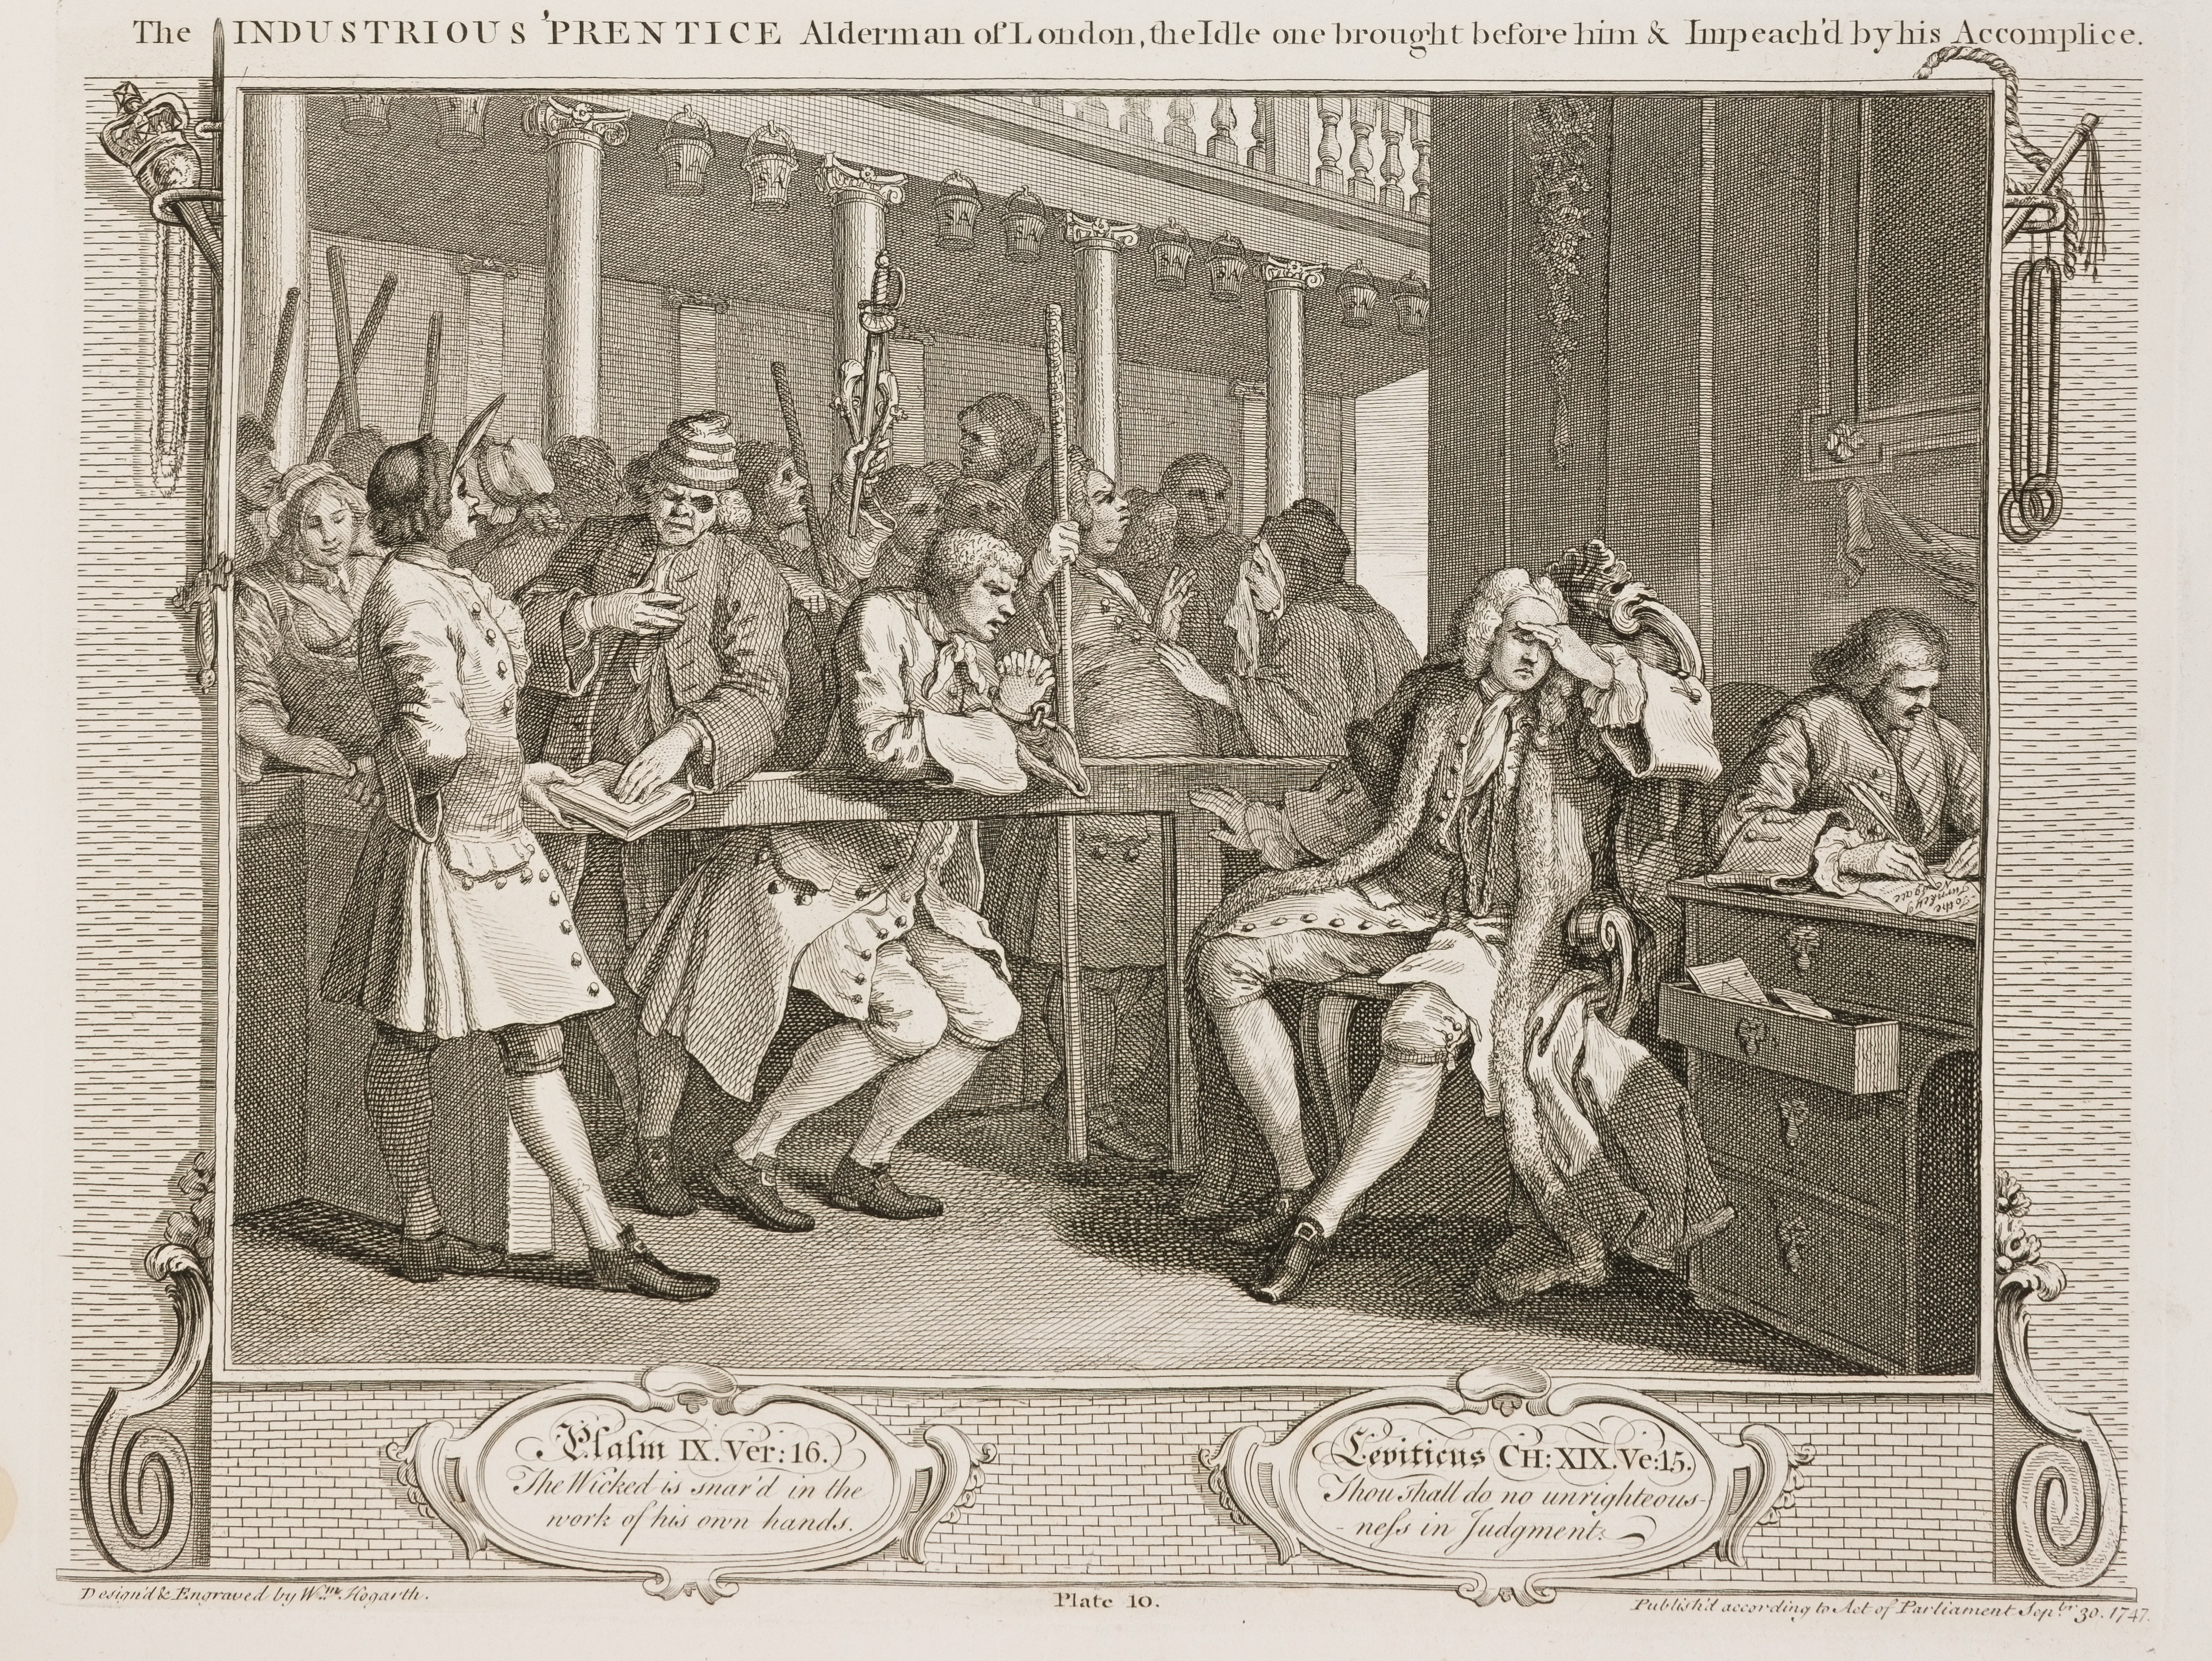 William Hogarth - Industry and Idleness - plate 10